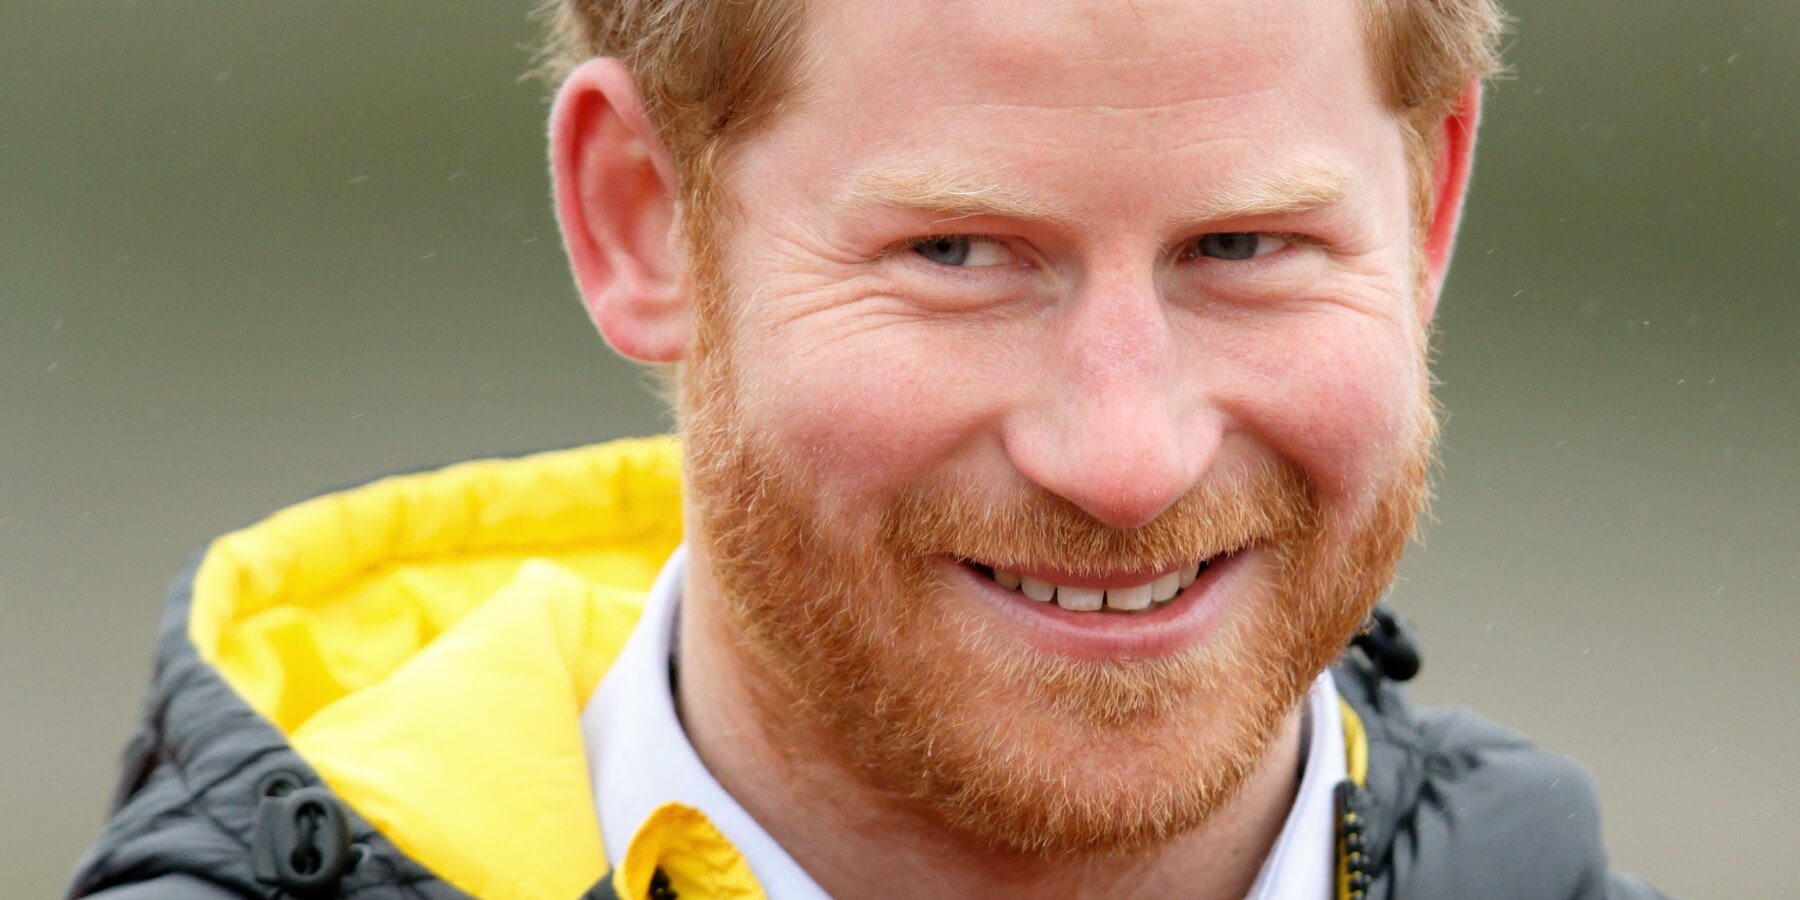 Prince Harry attends the Invictus Games ceremony in 2016